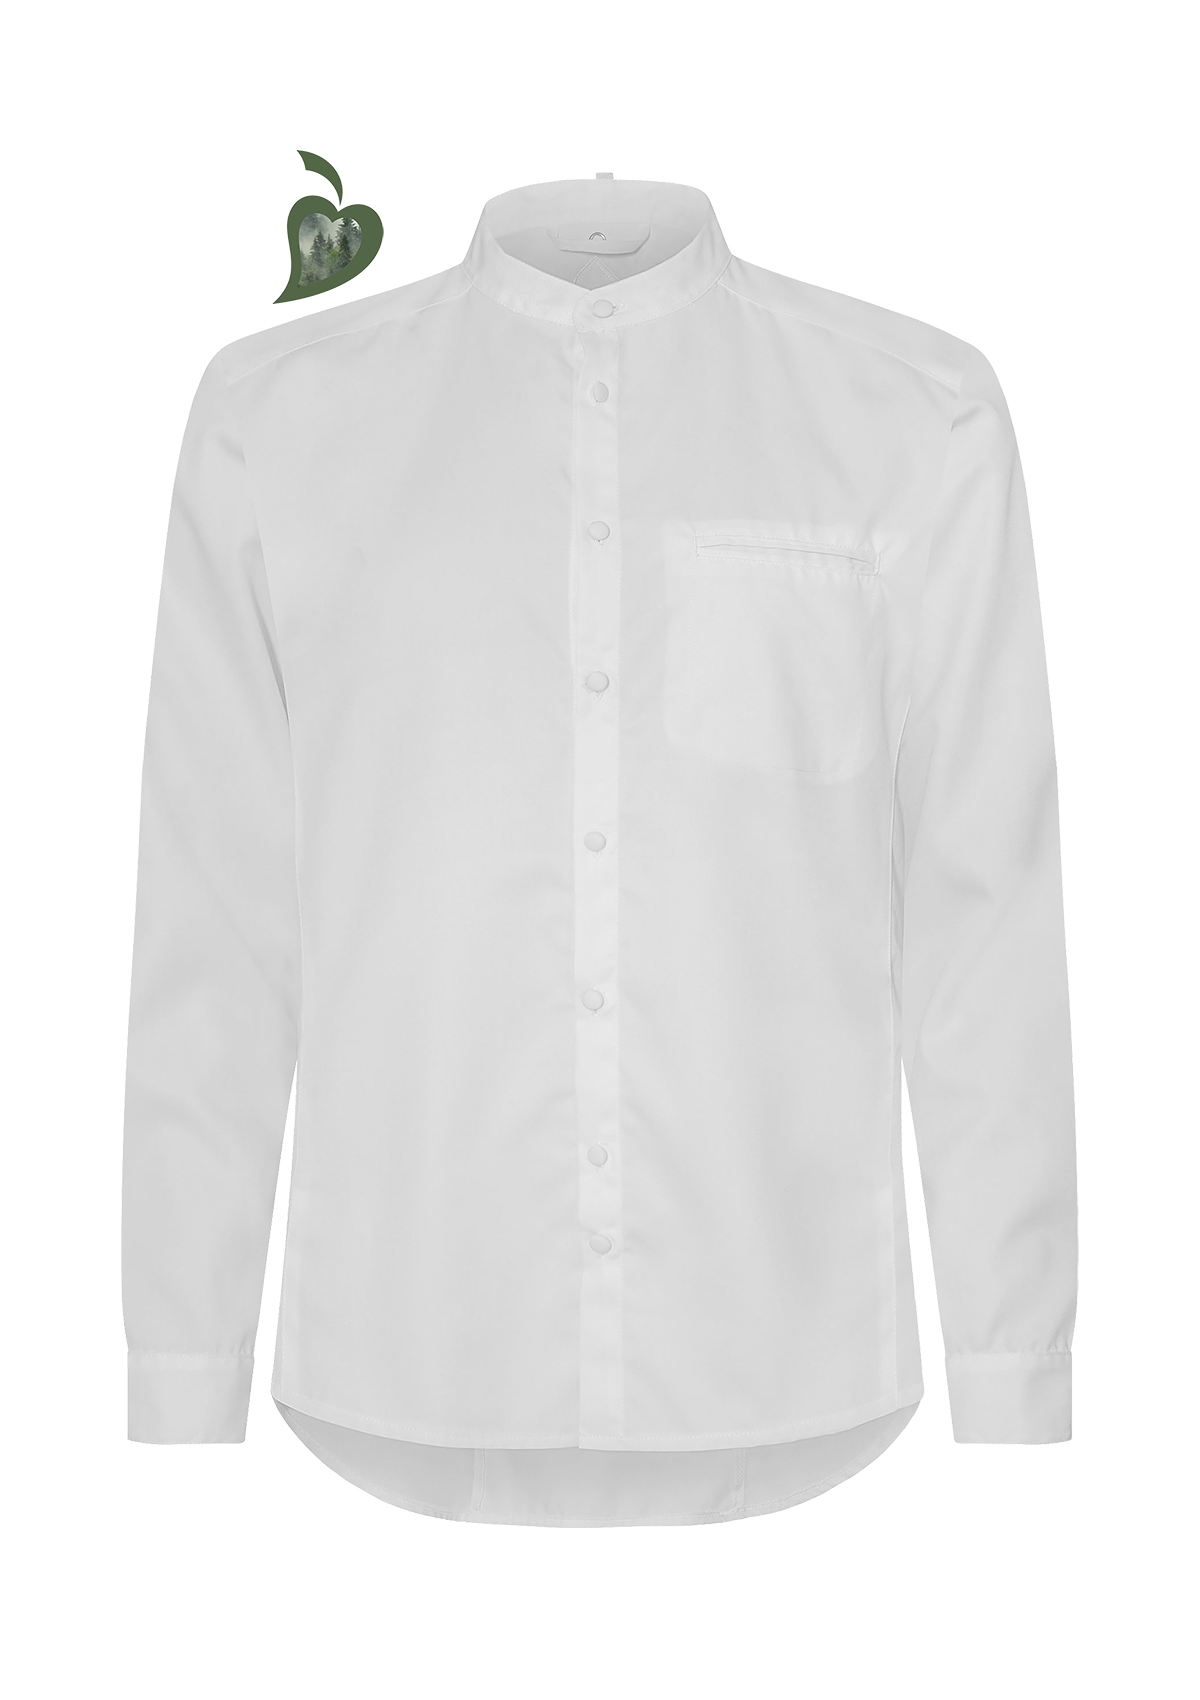 Men's Chef shirt in slim-fit with long sleeves and cuff. Segers | Cookniche